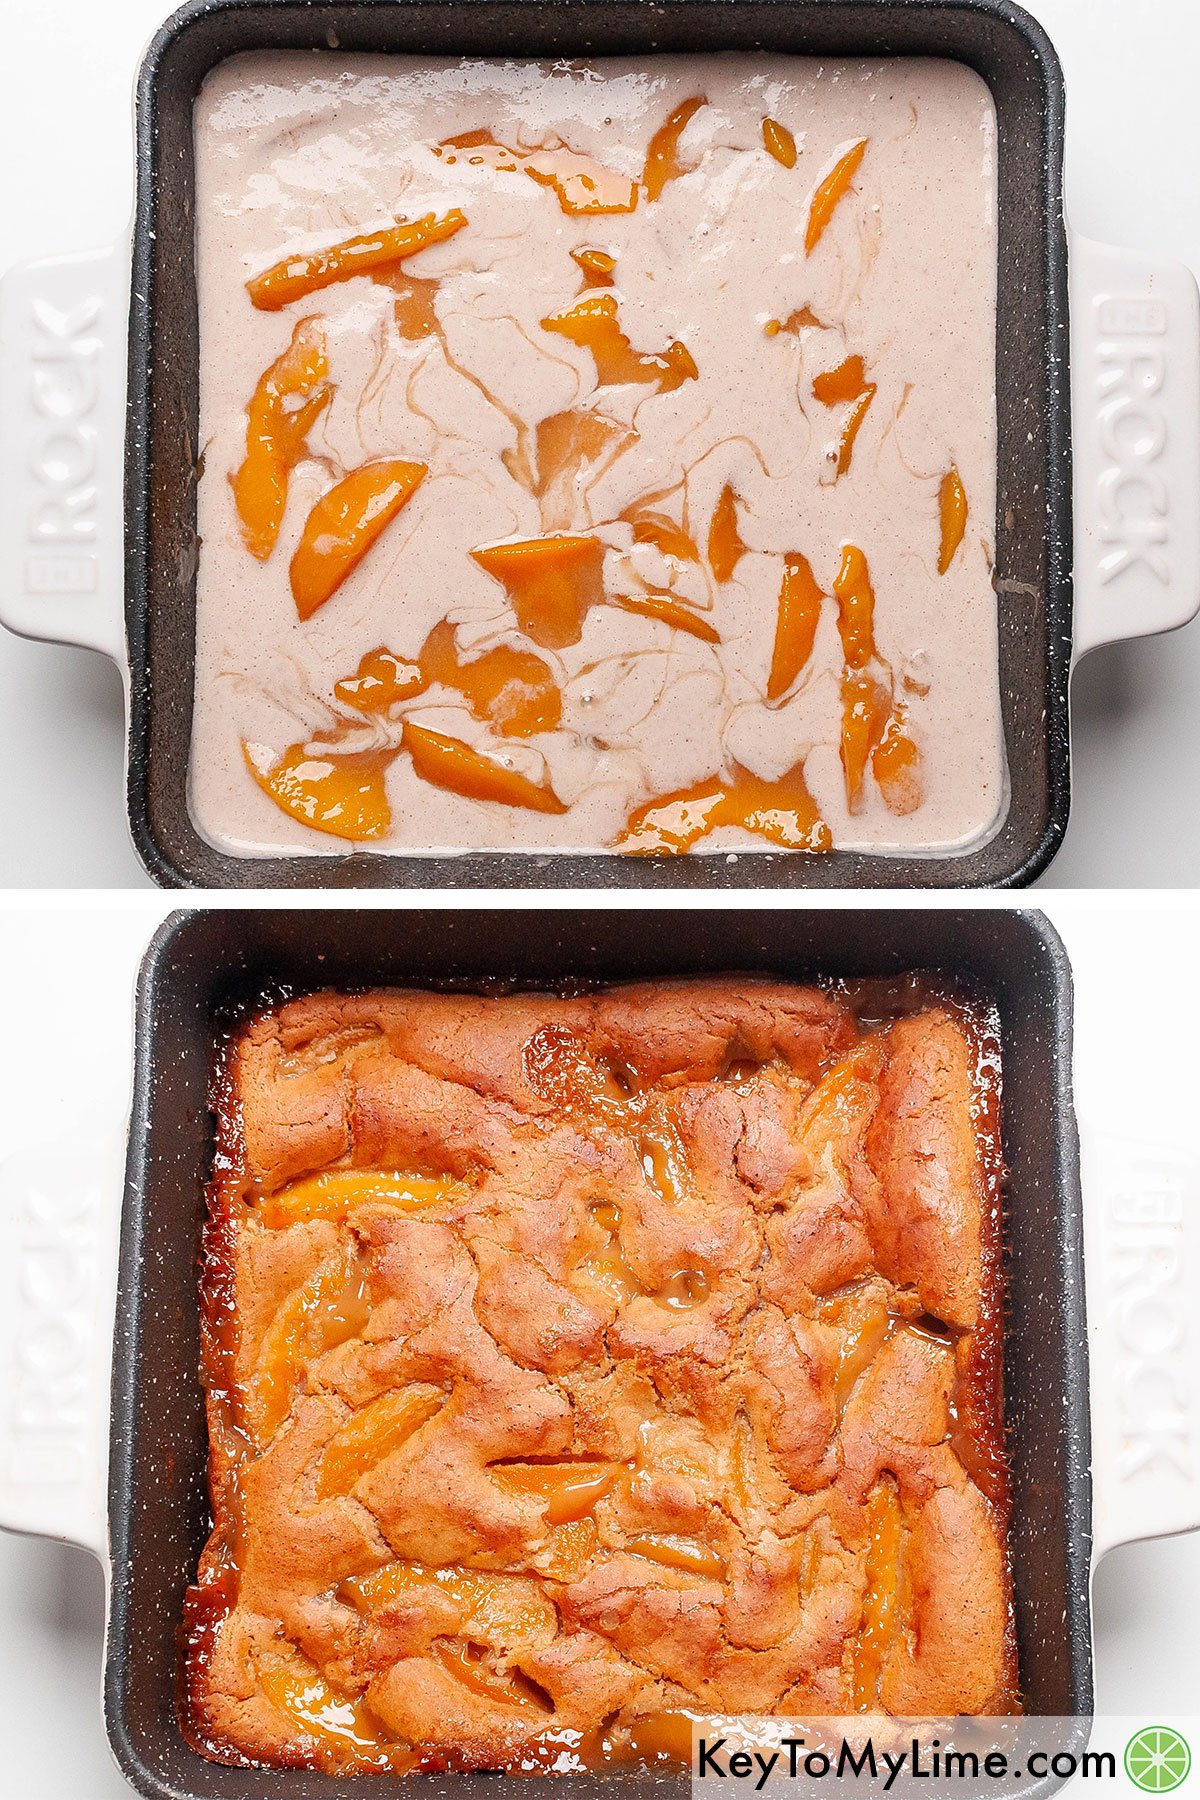 Bisquick peach cobbler before and after baking.